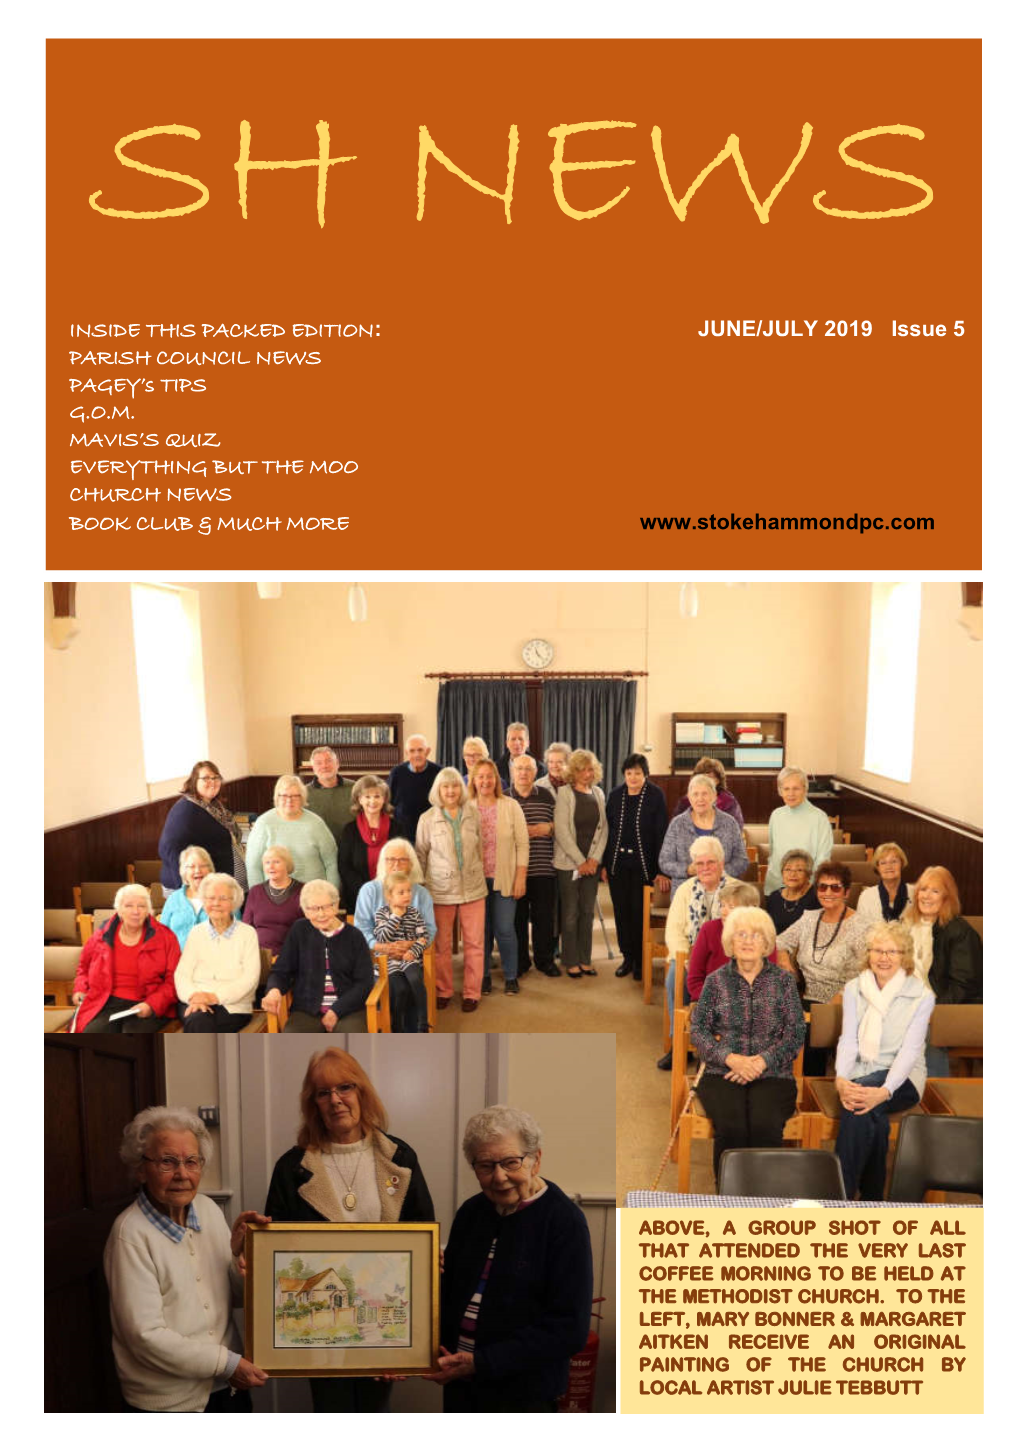 JUNE/JULY 2019 Issue 5 PARISH COUNCIL NEWS PAGEY’S TIPS G.O.M